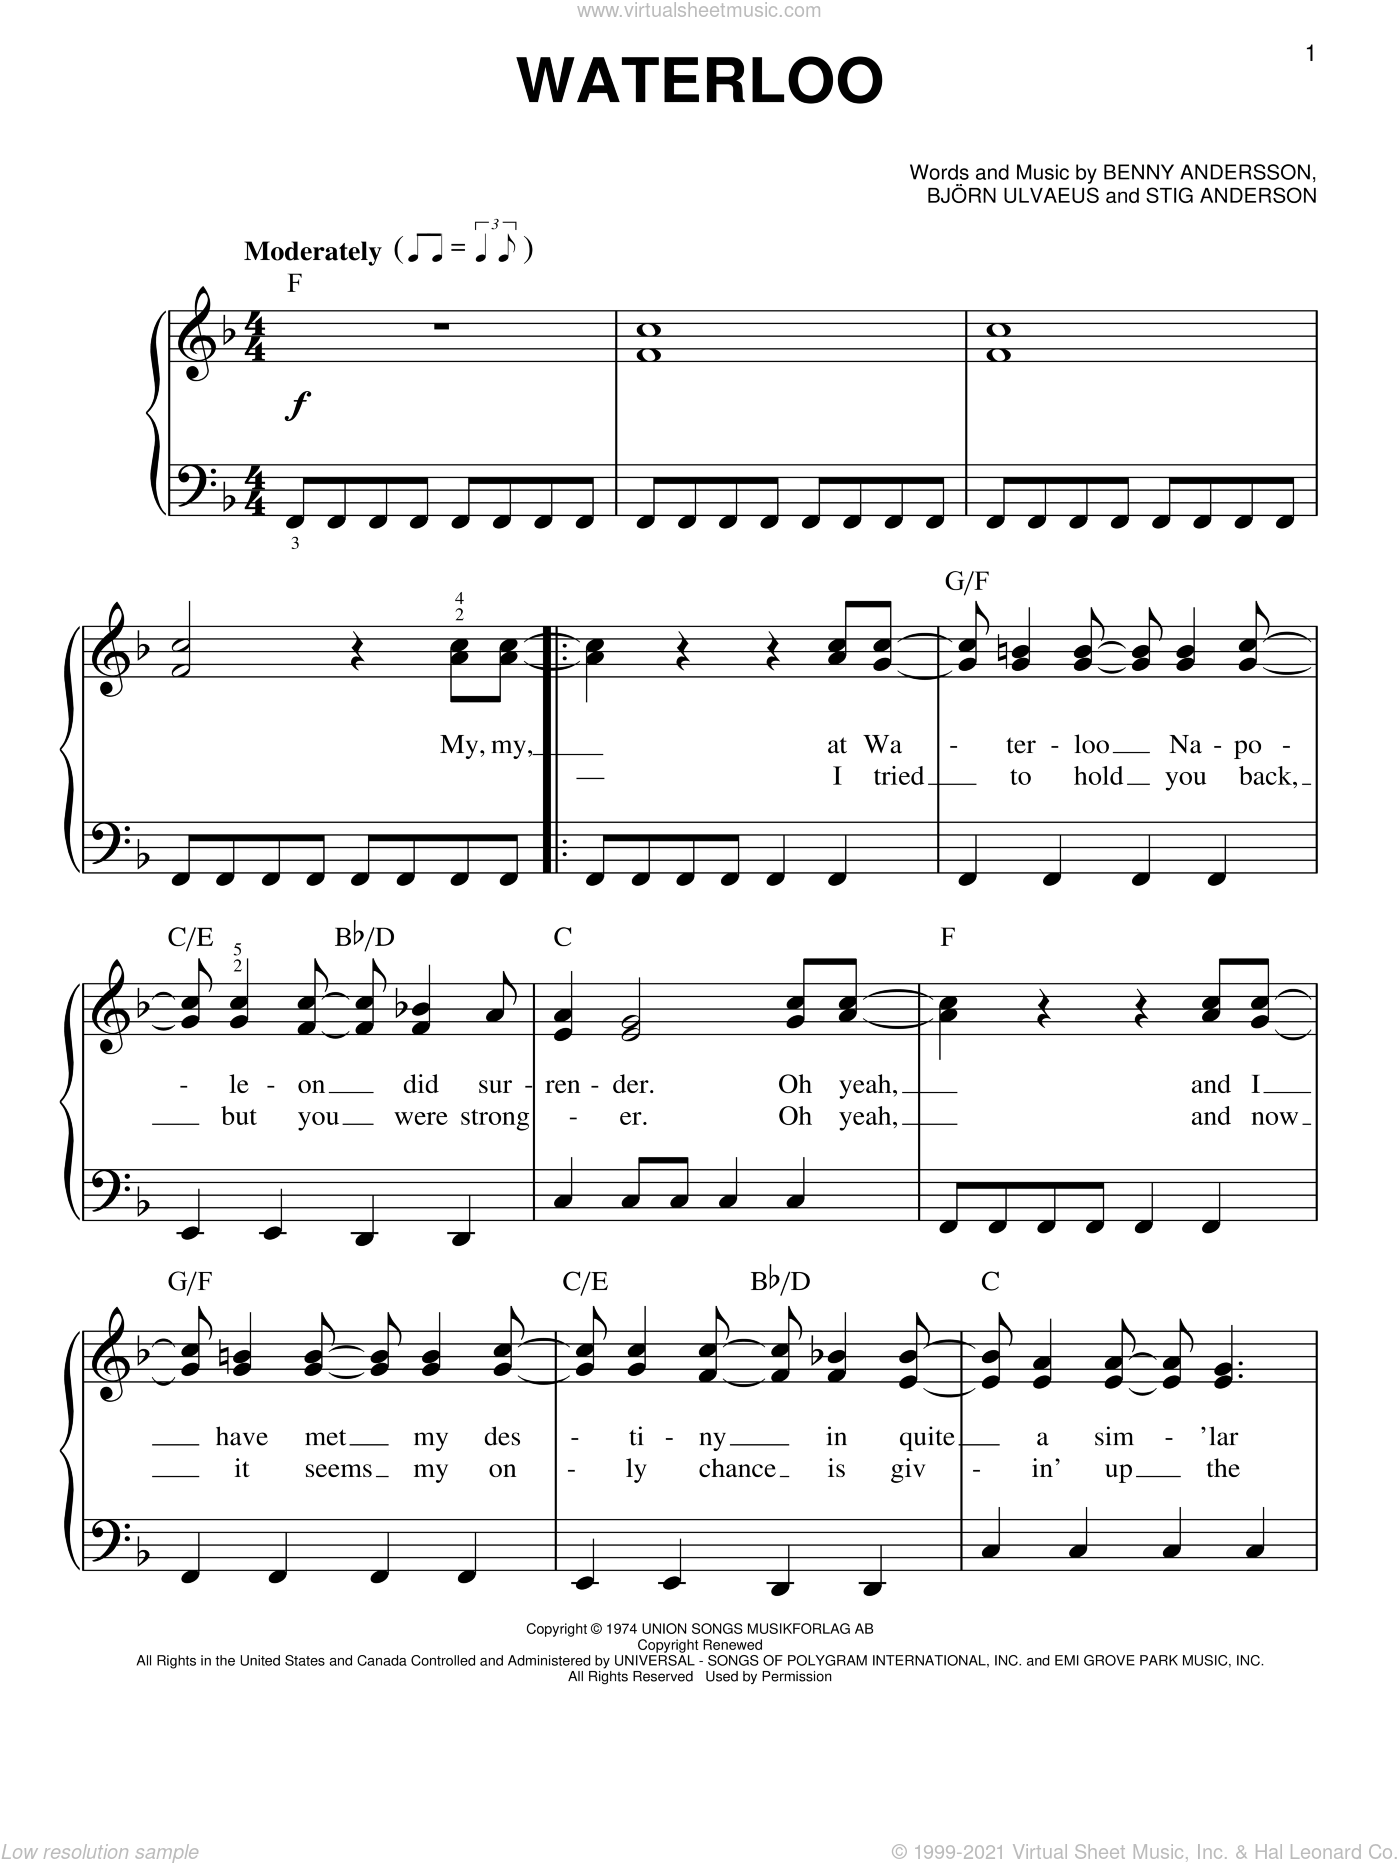 Abba Waterloo Easy Sheet Music For Piano Solo Pdf My, my at waterloo, napoleon did surrender oh yeah. abba waterloo easy sheet music for piano solo pdf